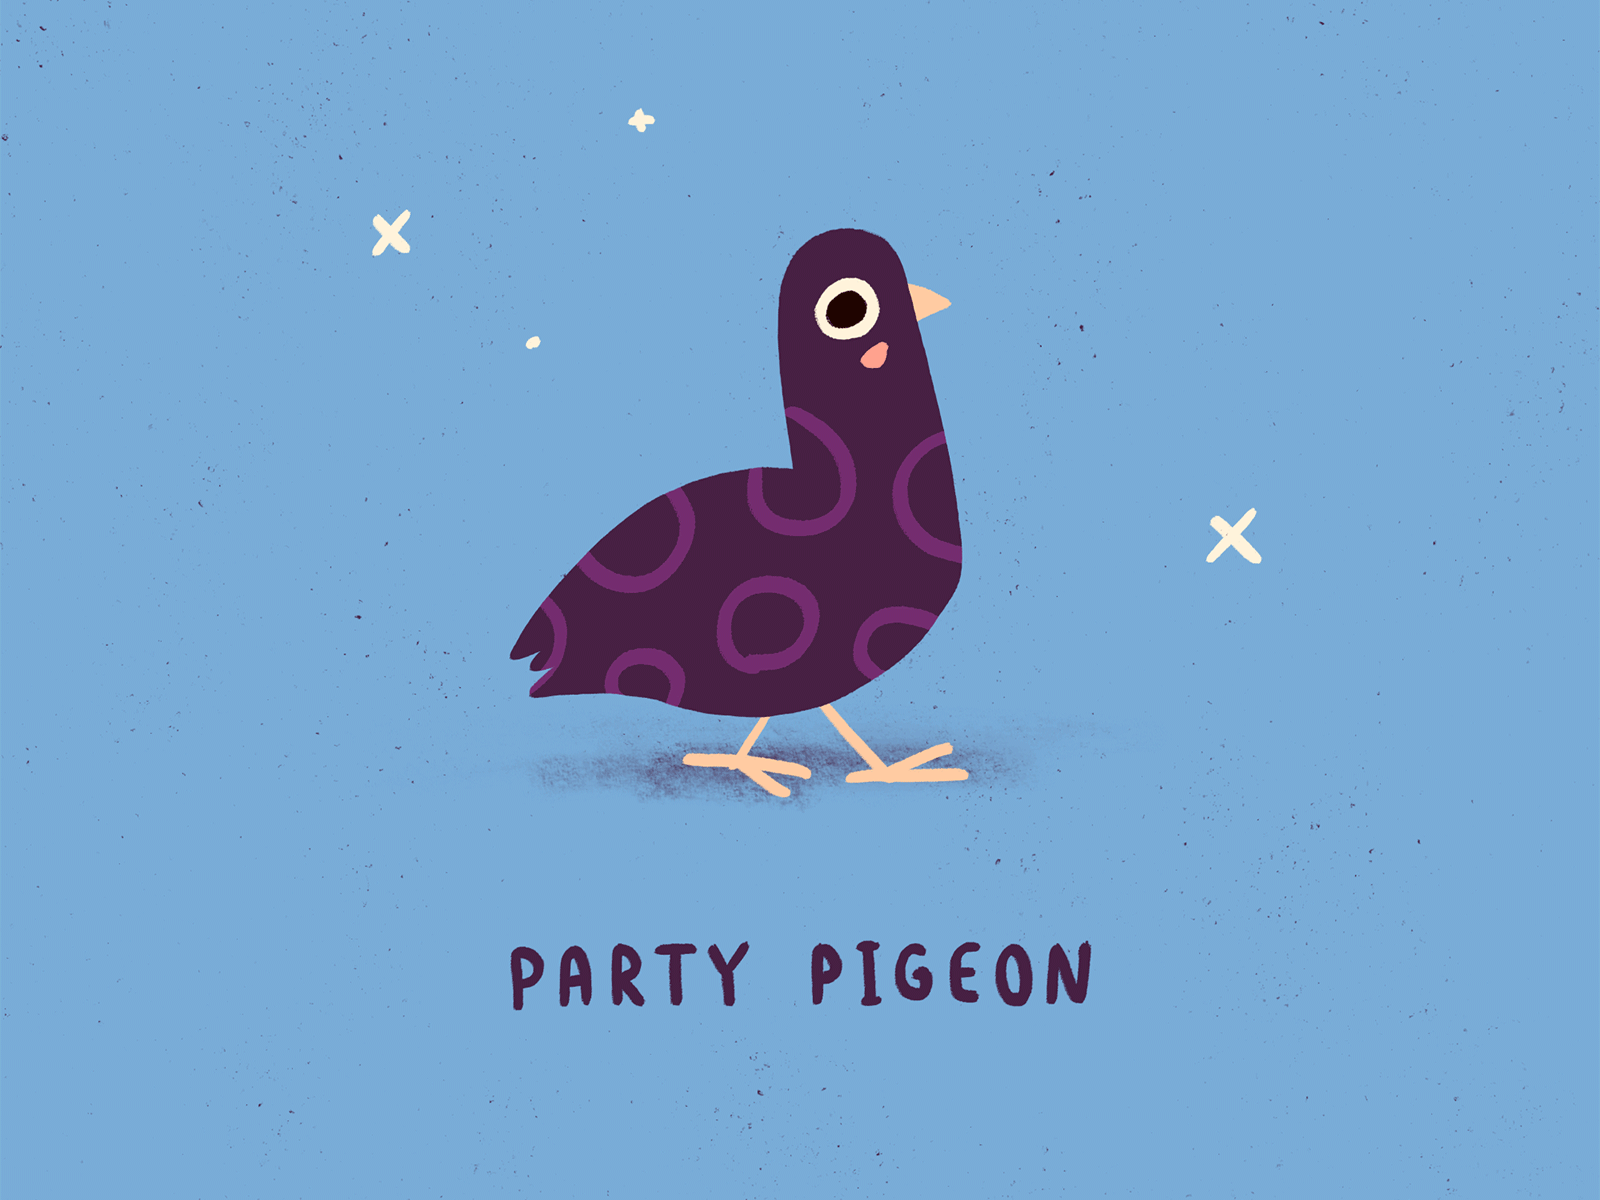 Party pigeon